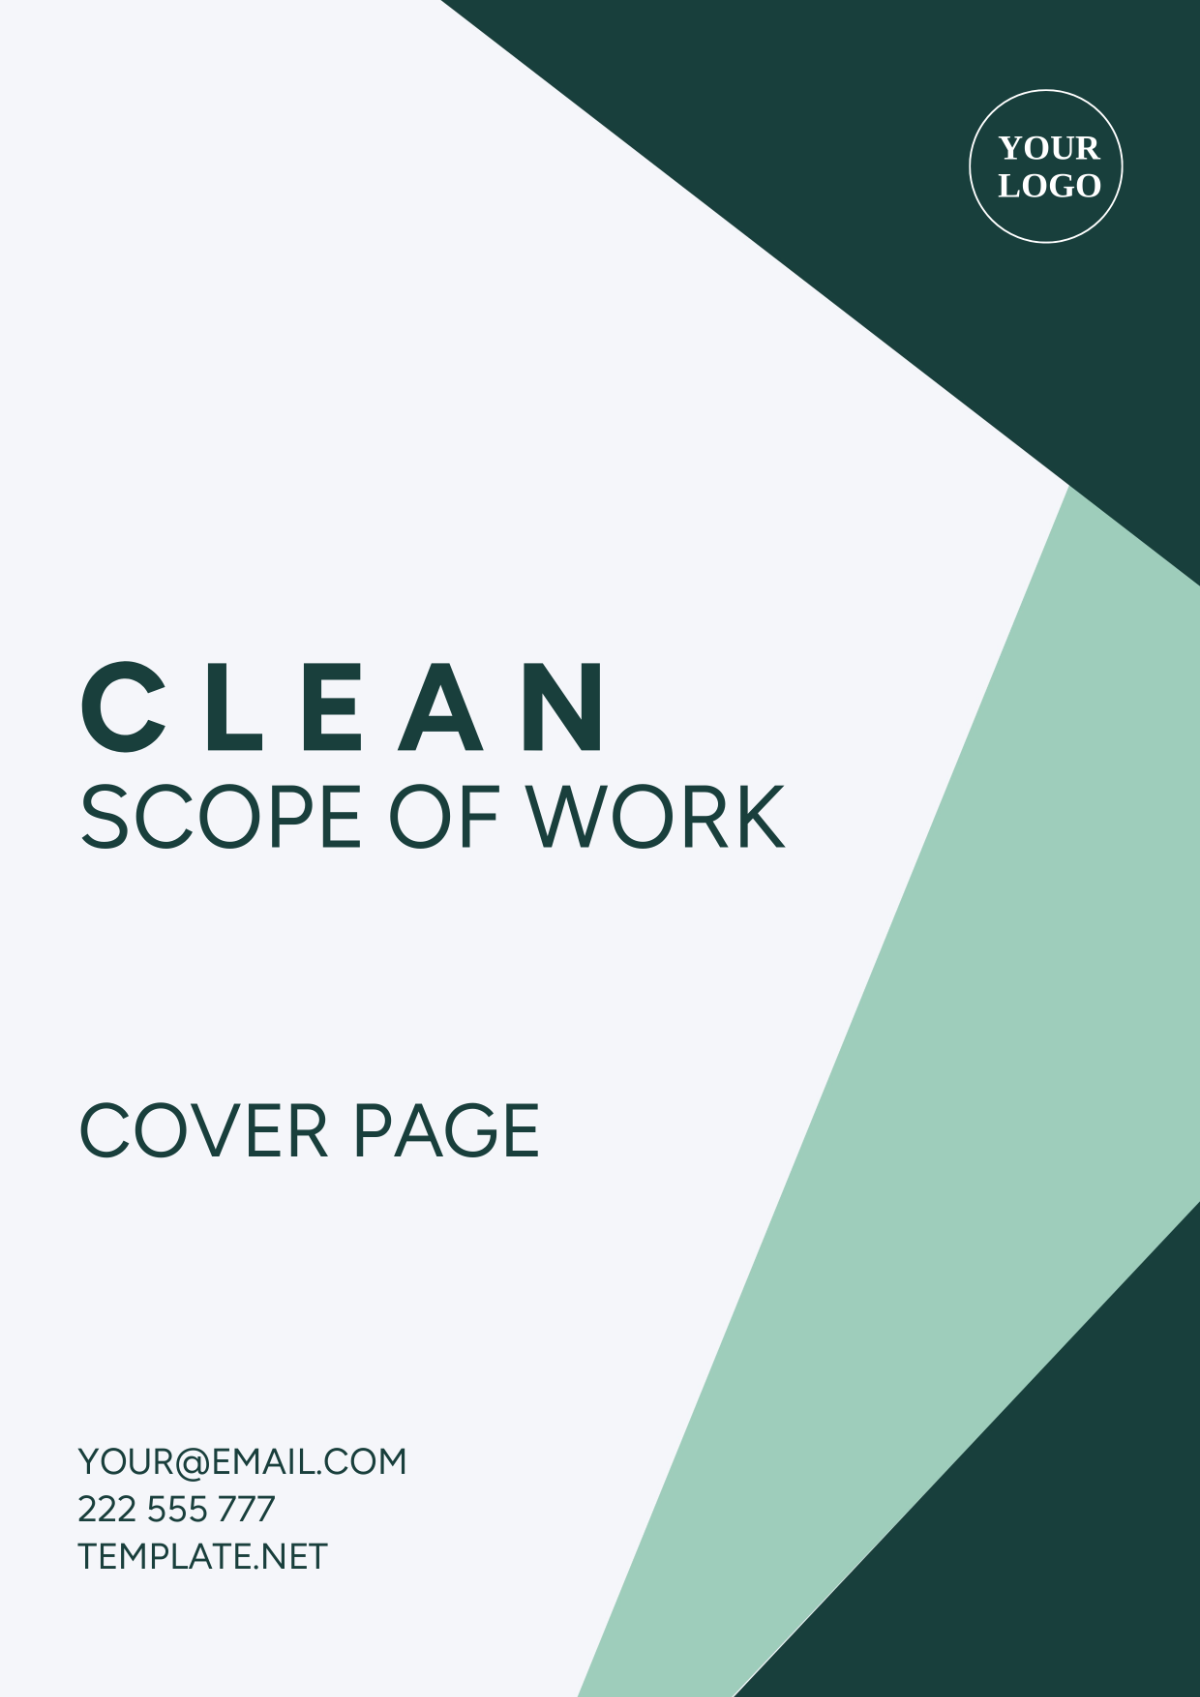 Clean Scope of Work Cover Page Template